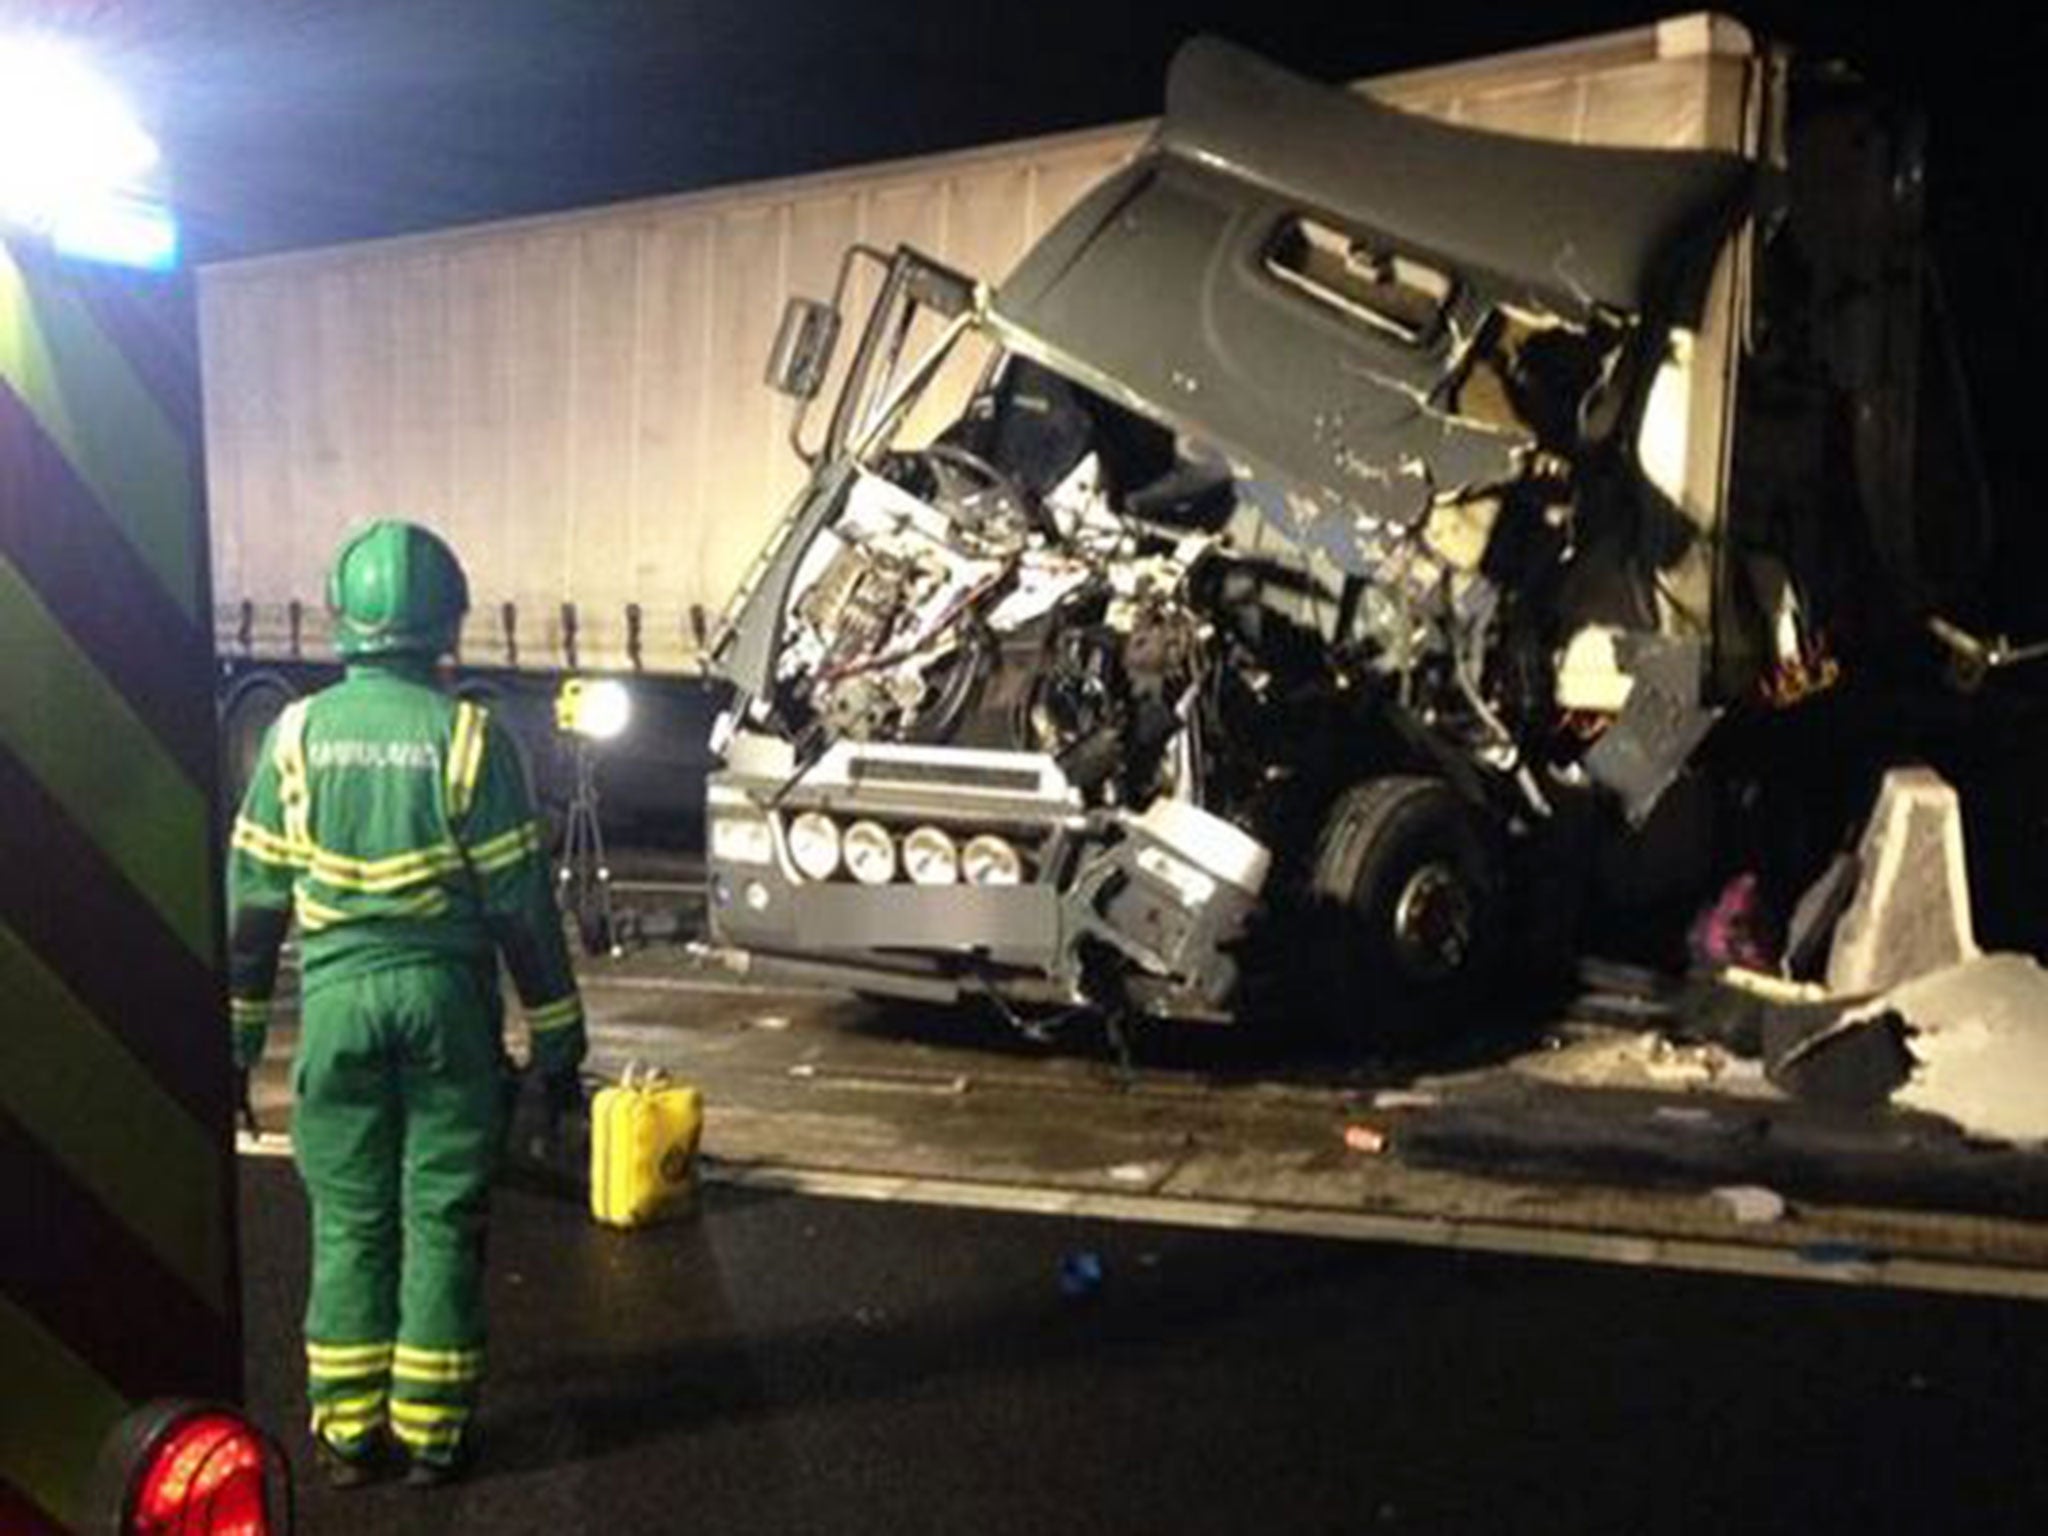 A lorry crash on the M25 at 1.50am on 9 December, which has killed one person and injured three others after the vehicle crossed through the central reservation, closing the motorway in both directions between junctions 25 and 27